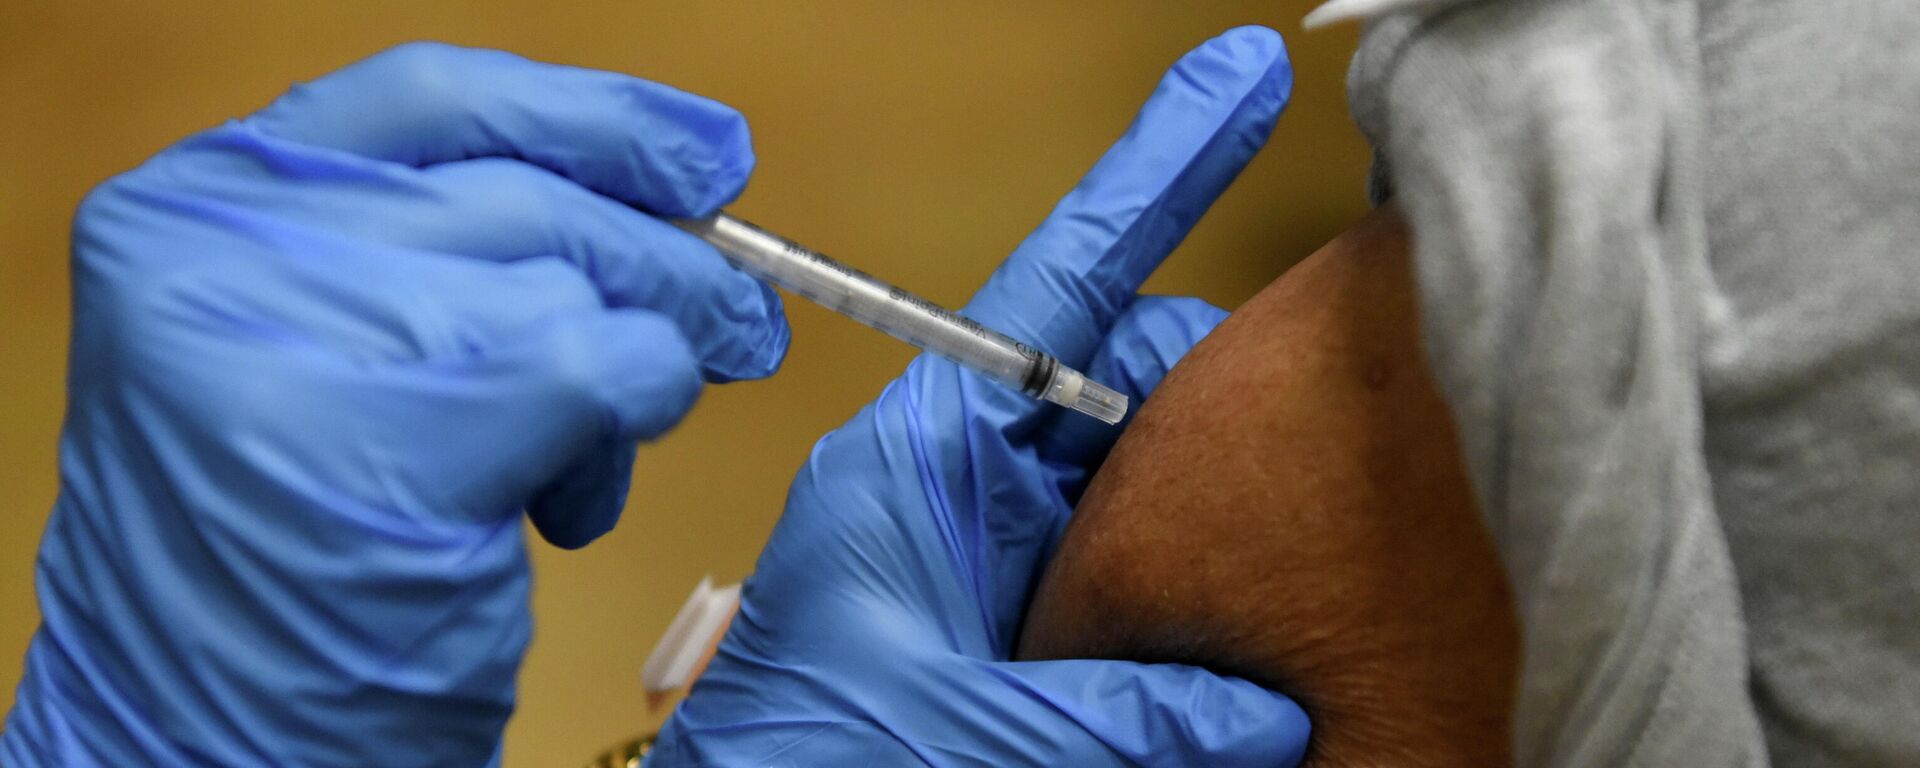 A person receives a vaccine for the coronavirus disease (COVID-19) following Republican Governor Greg Abbott's ban on COVID-19 vaccine mandates by any entity, including private employers, at Acres Home Multi-Service Center in Houston, Texas, U.S., October 13, 2021. - Sputnik International, 1920, 04.11.2021